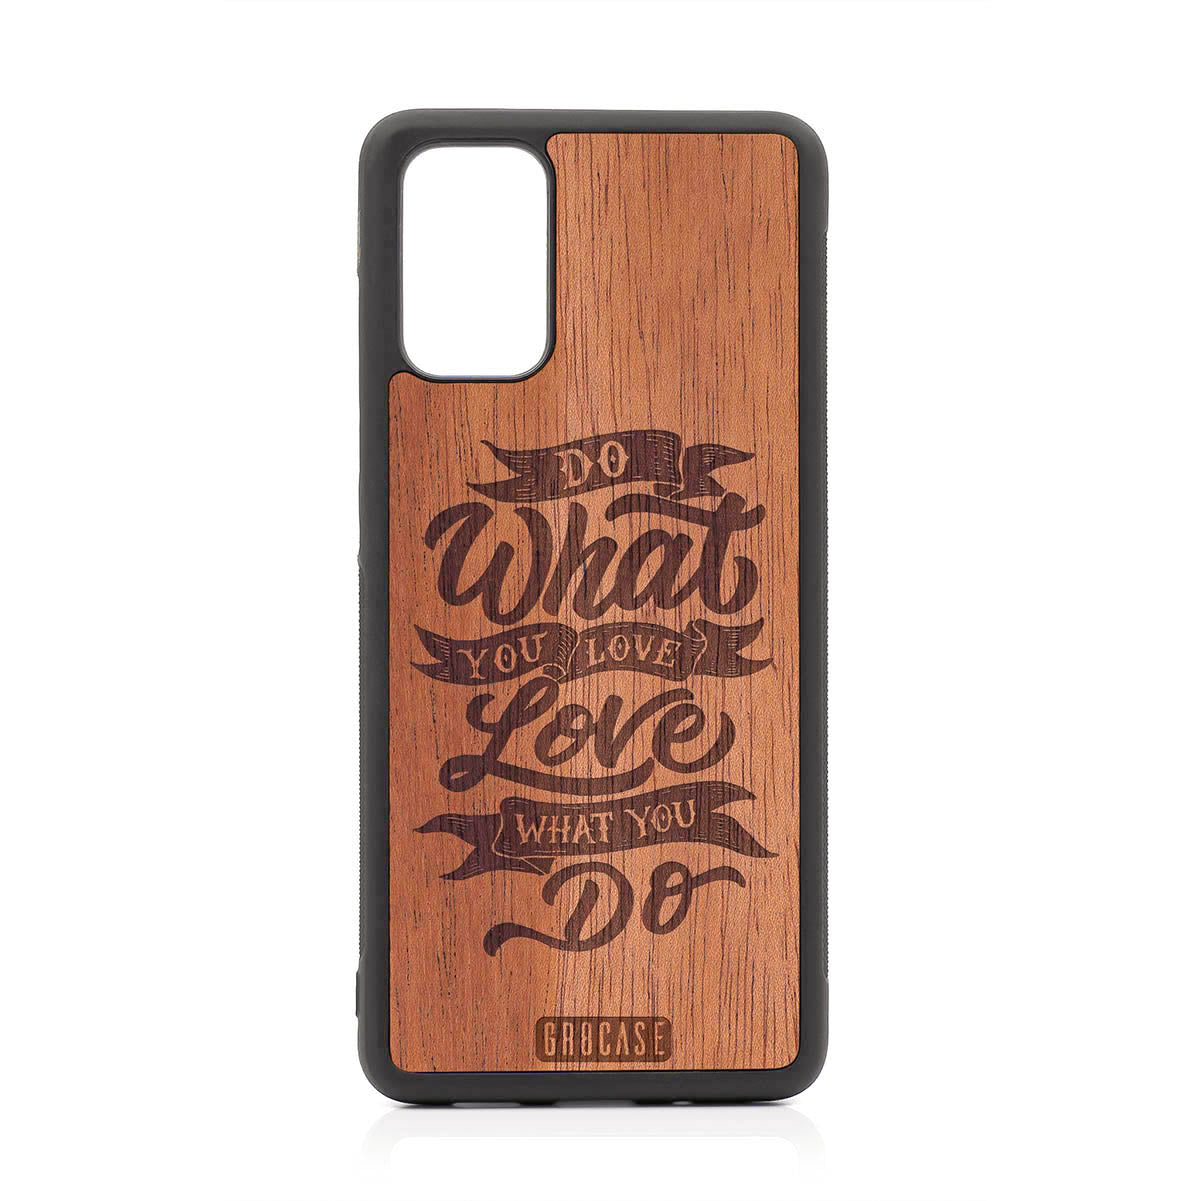 Do What You Love Love What You Do Design Wood Case For Samsung Galaxy S20 Plus by GR8CASE